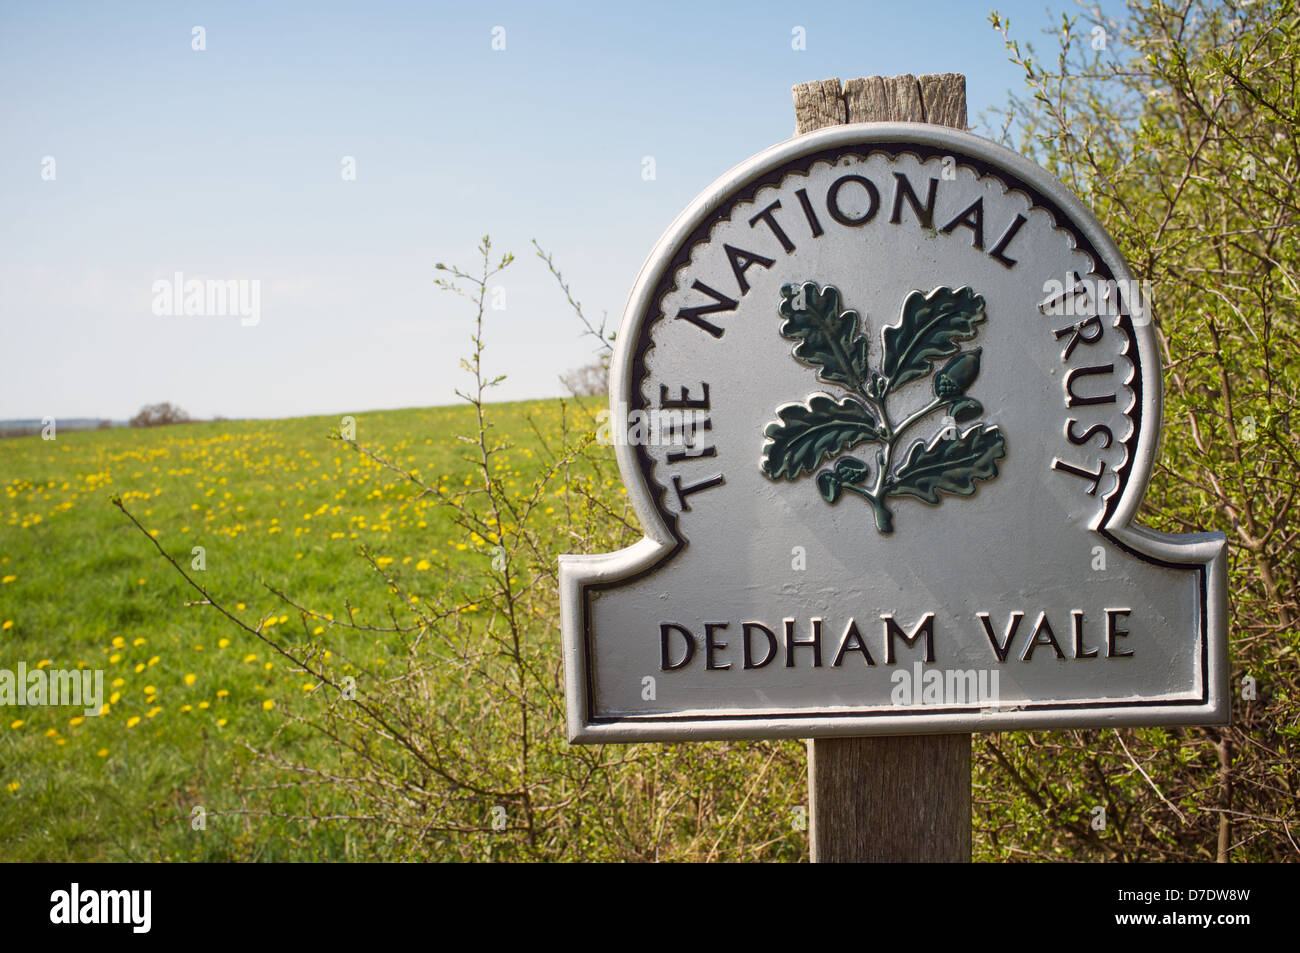 The National Trust, Dedham Vale sign Stock Photo